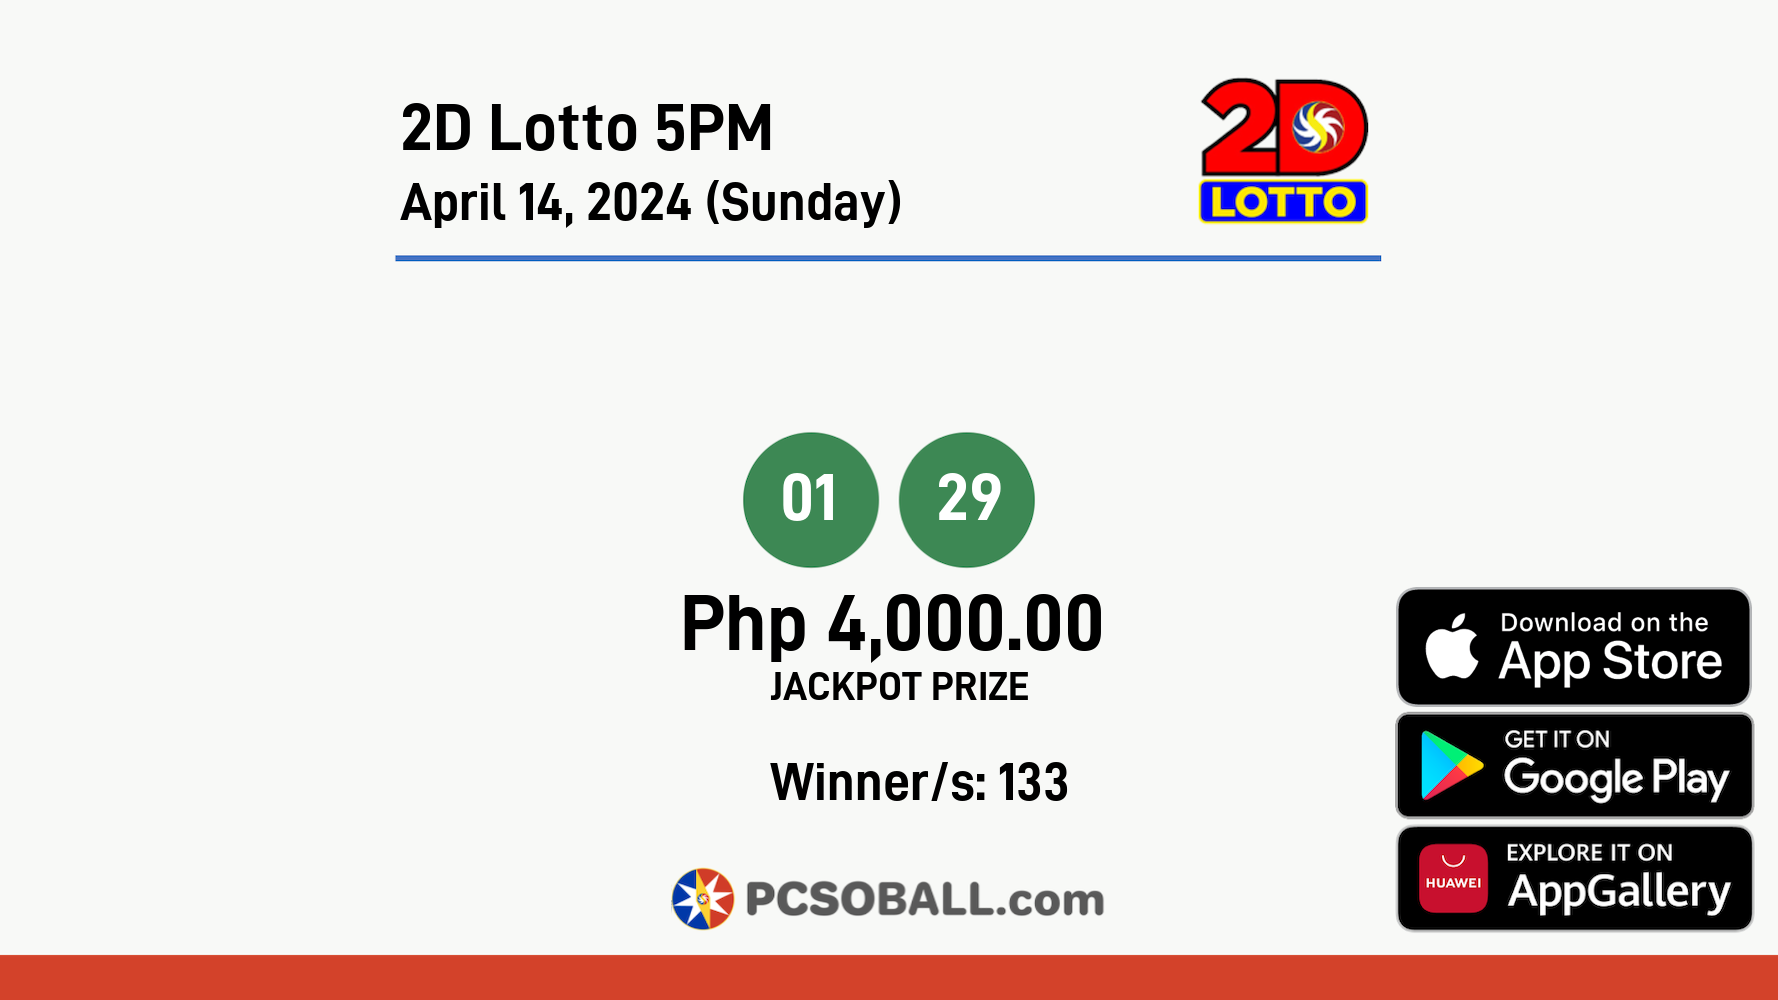 2D Lotto 5PM April 14, 2024 (Sunday) Result